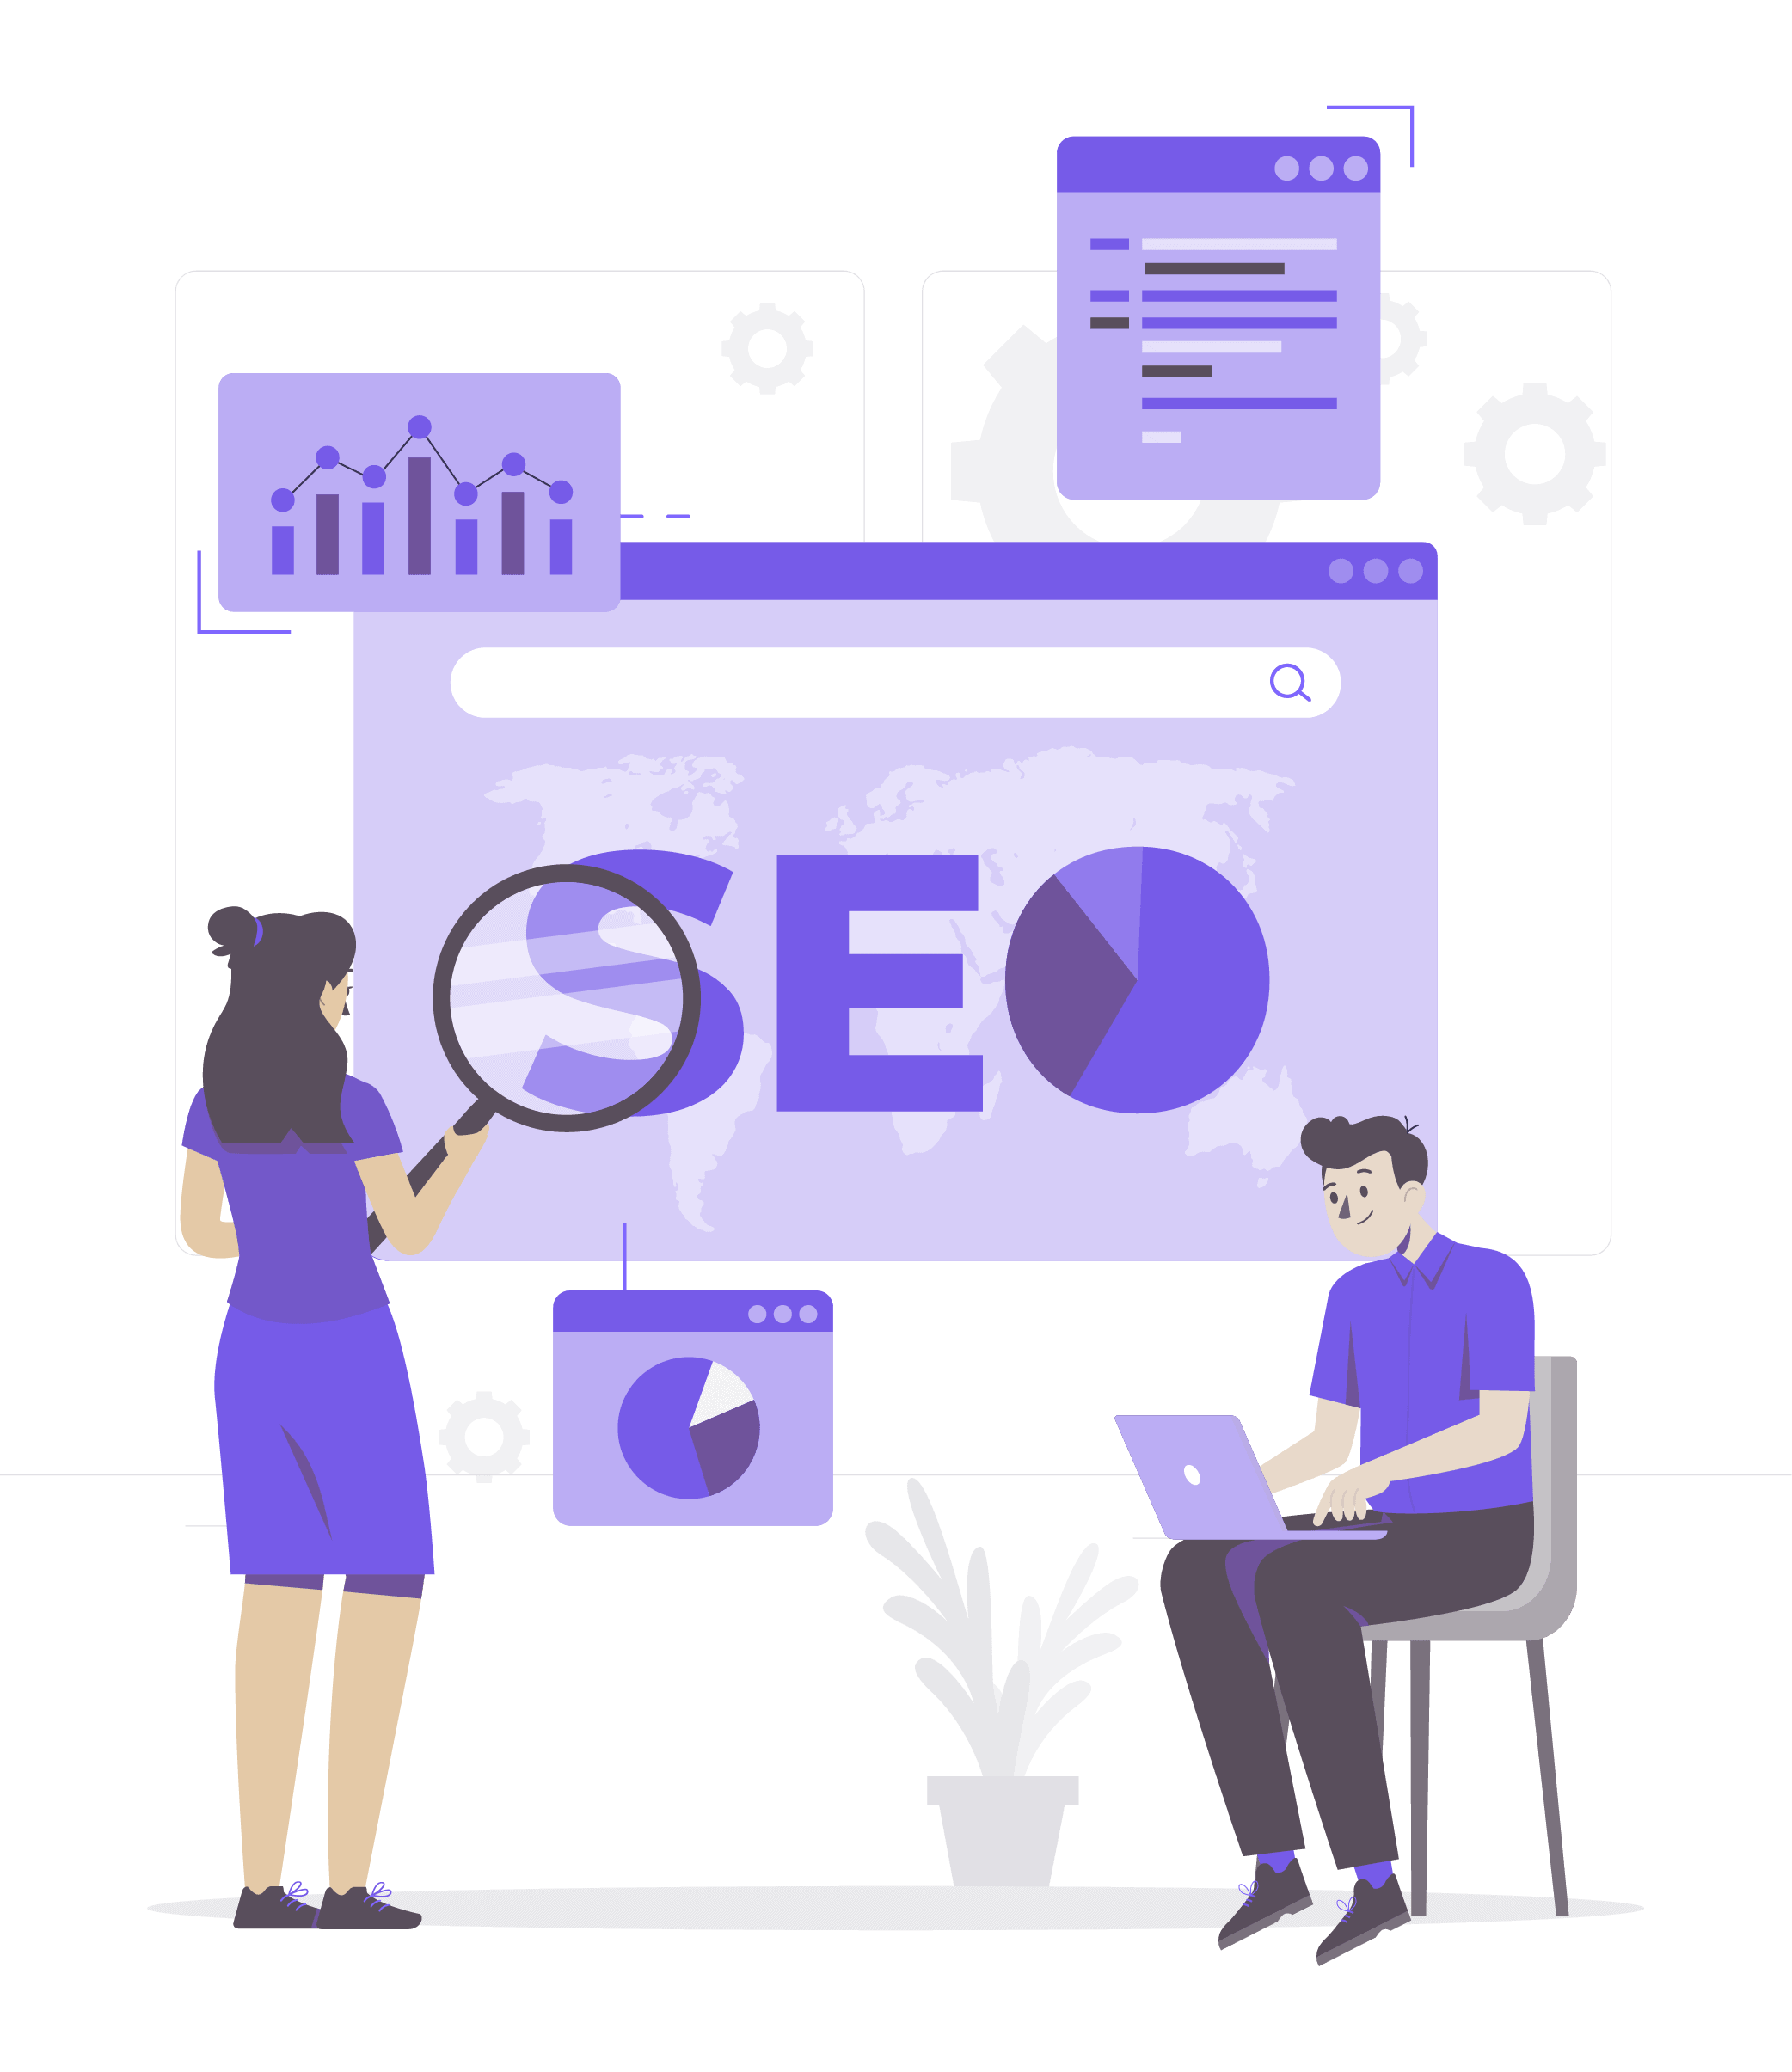 SEO support